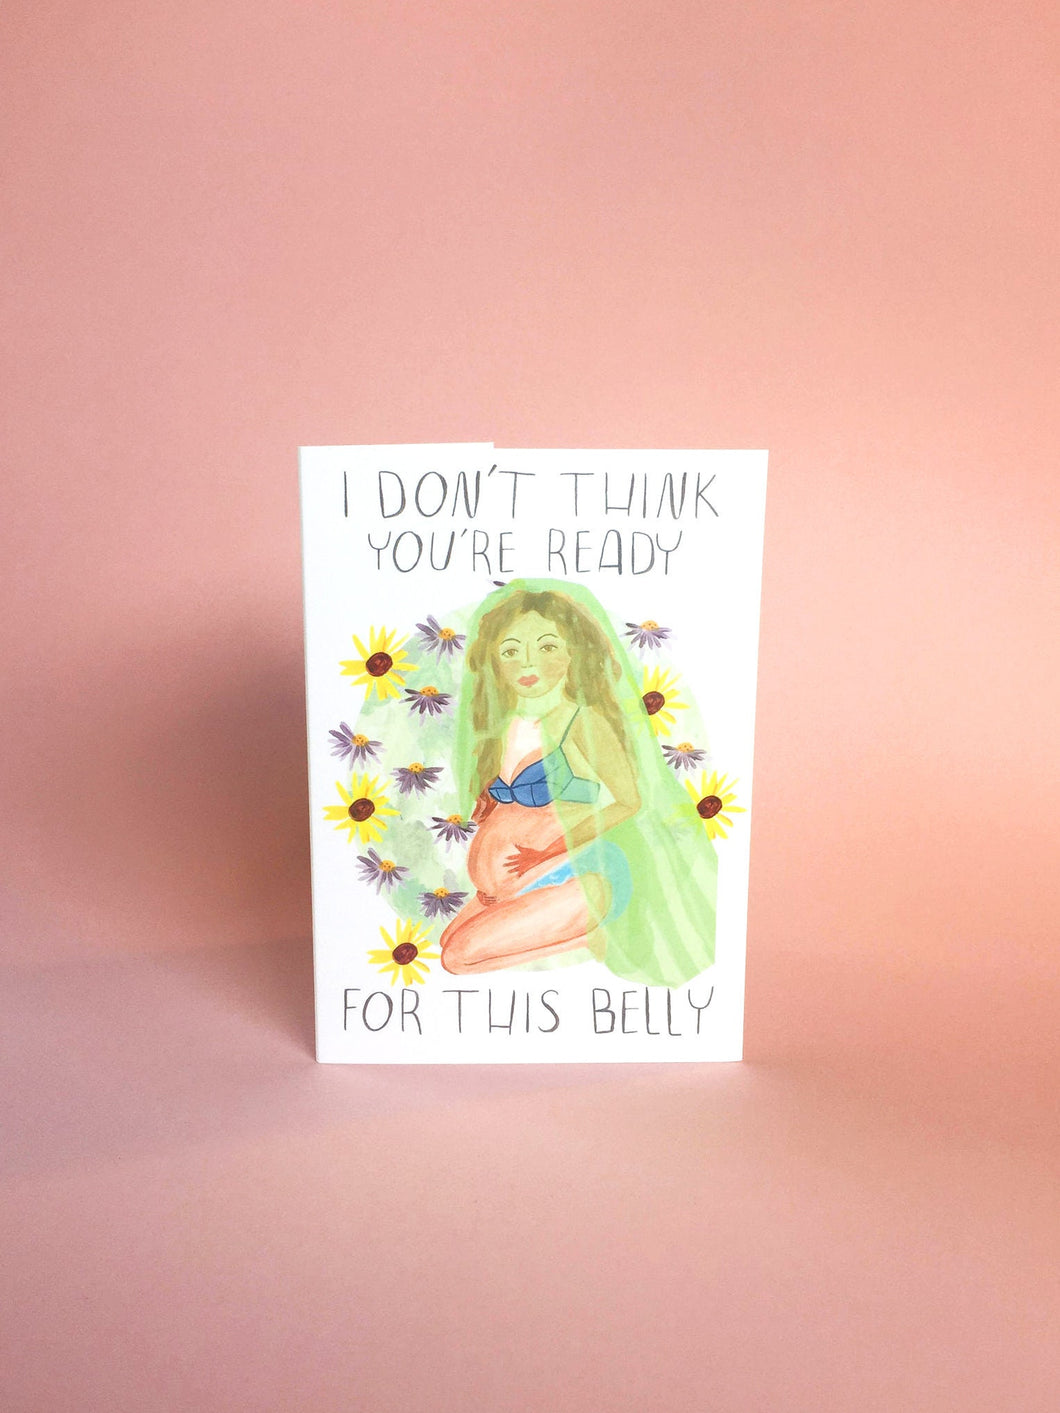 Beyonce Inspired Greetings Card - I Don't Think You're Ready For This Belly - Funny Pregnancy Card, Celebrity Illustration, Pun, Best Friend - Fernandes Makes